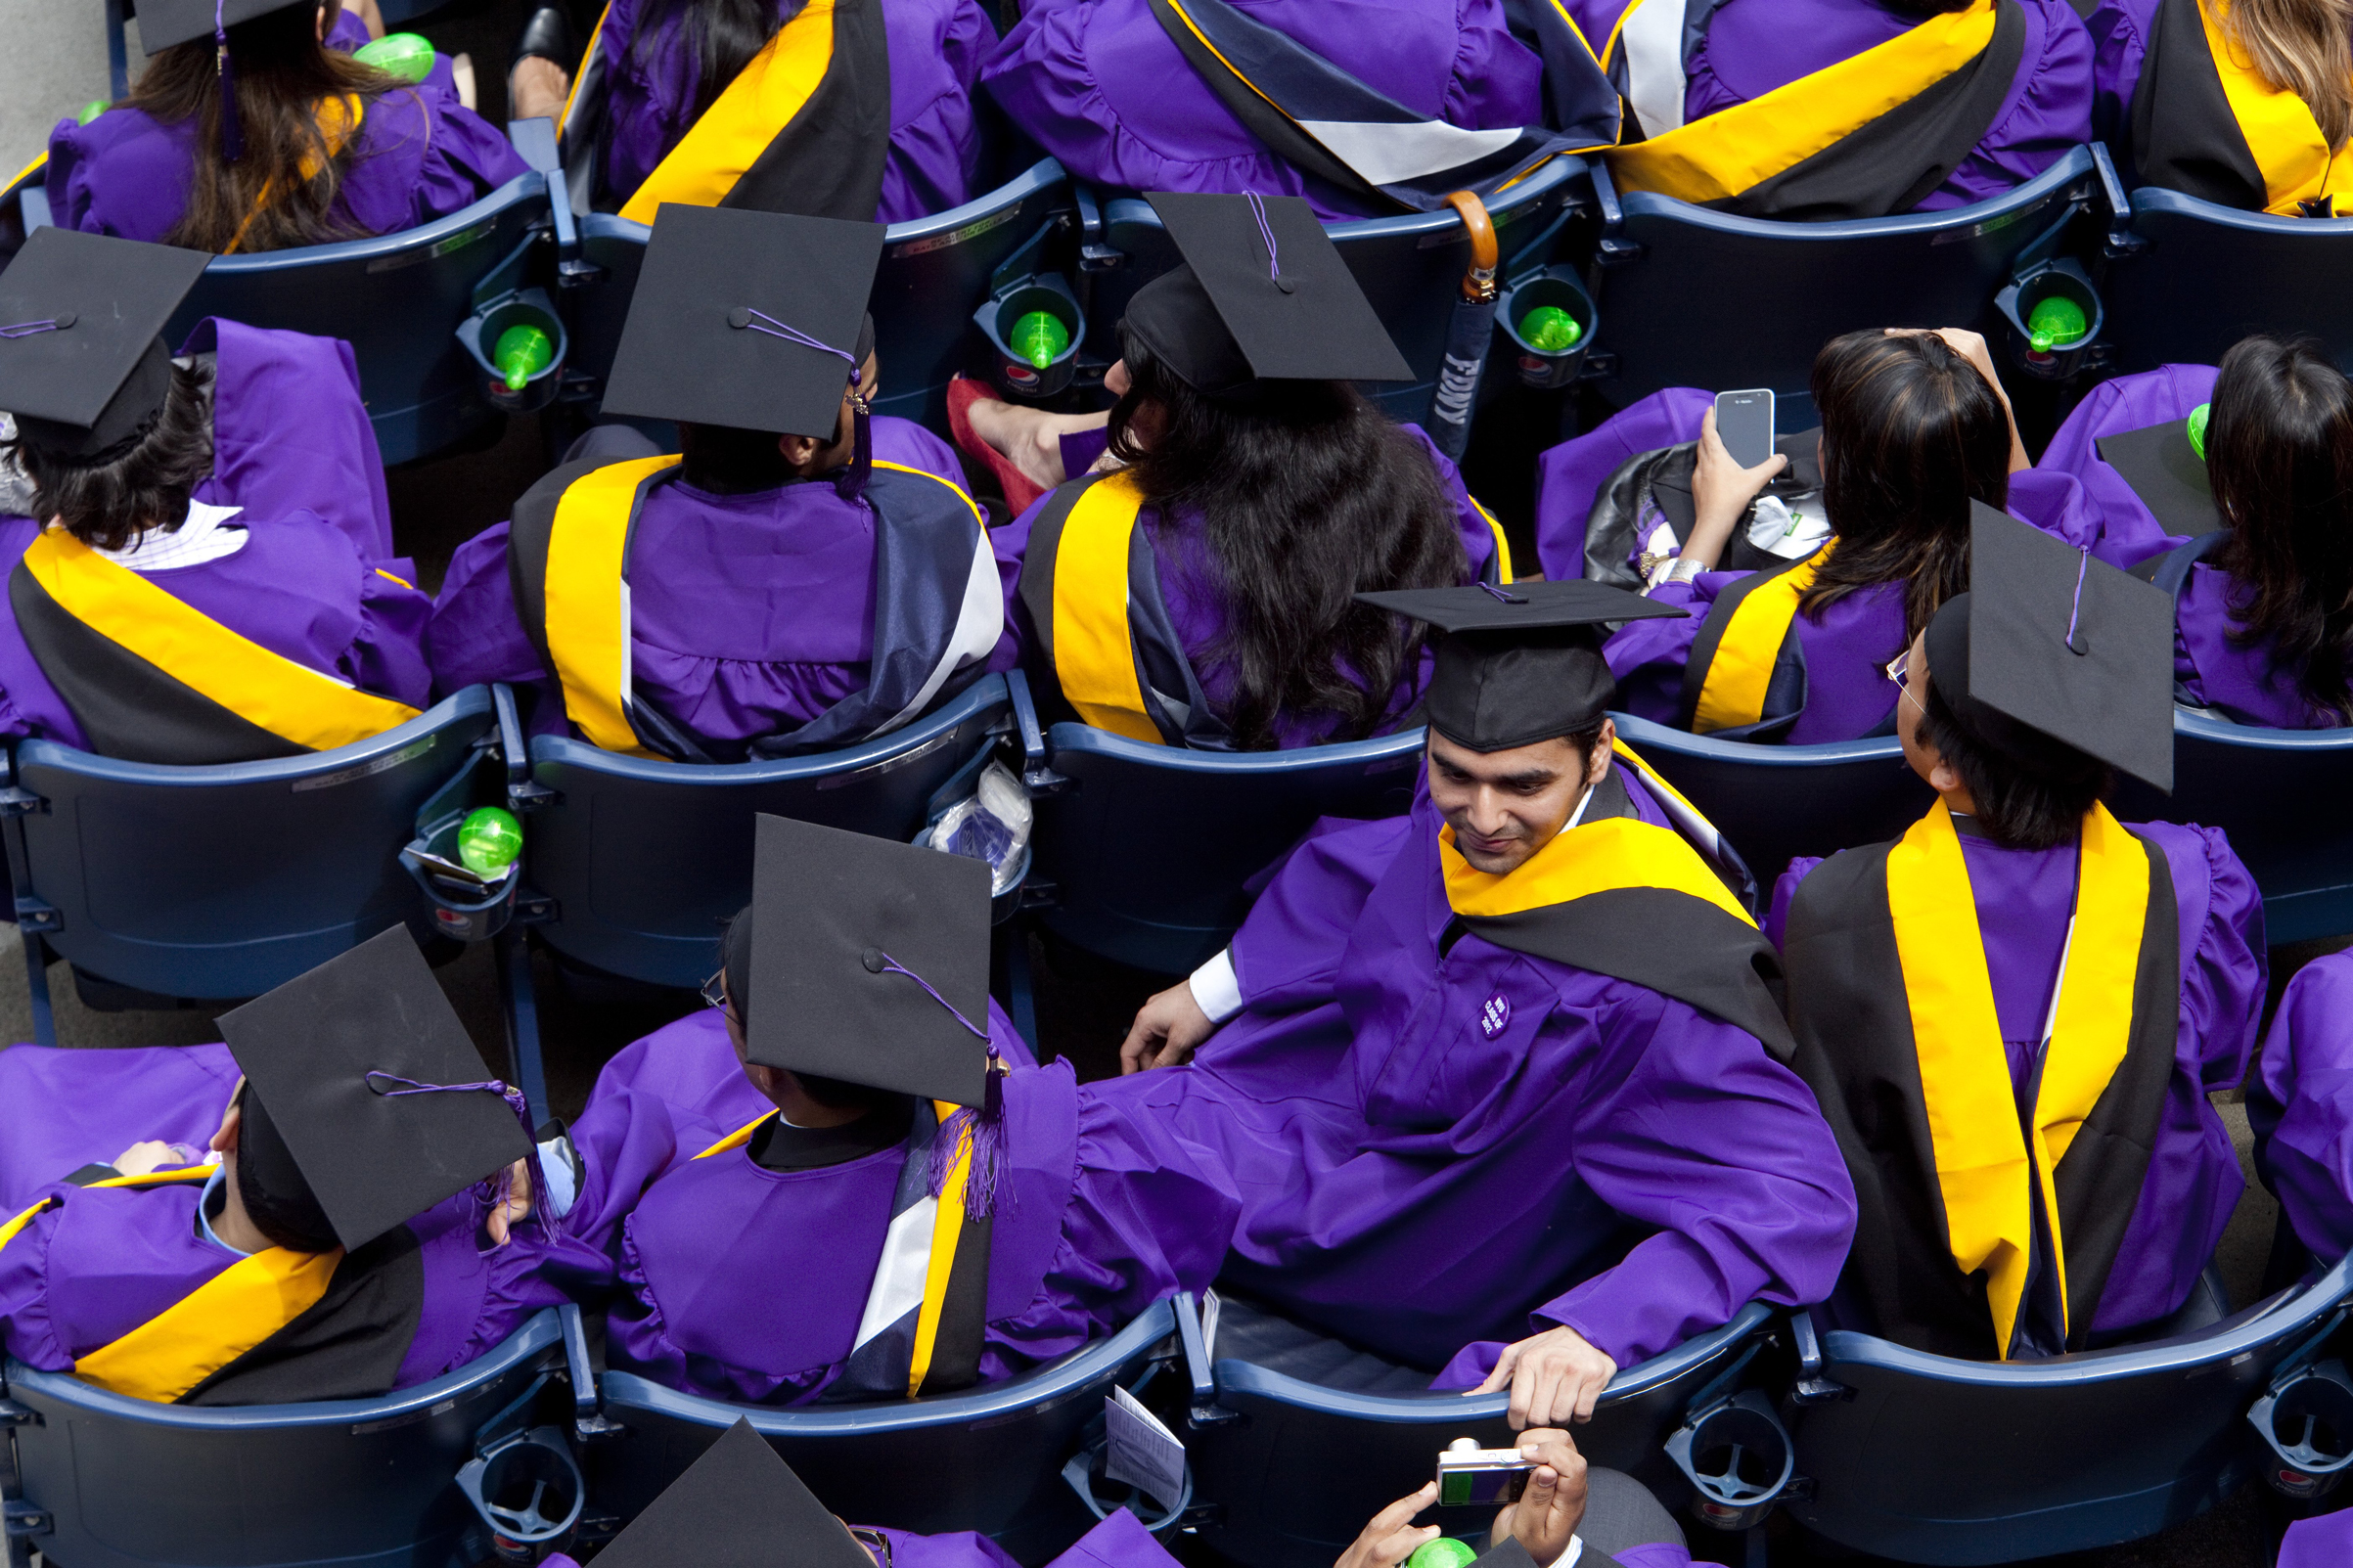 New York University's commencement ceremony at Yankee Stadium in New York, NY, on May 16, 2012. (2012 The Christian Science Monitor)